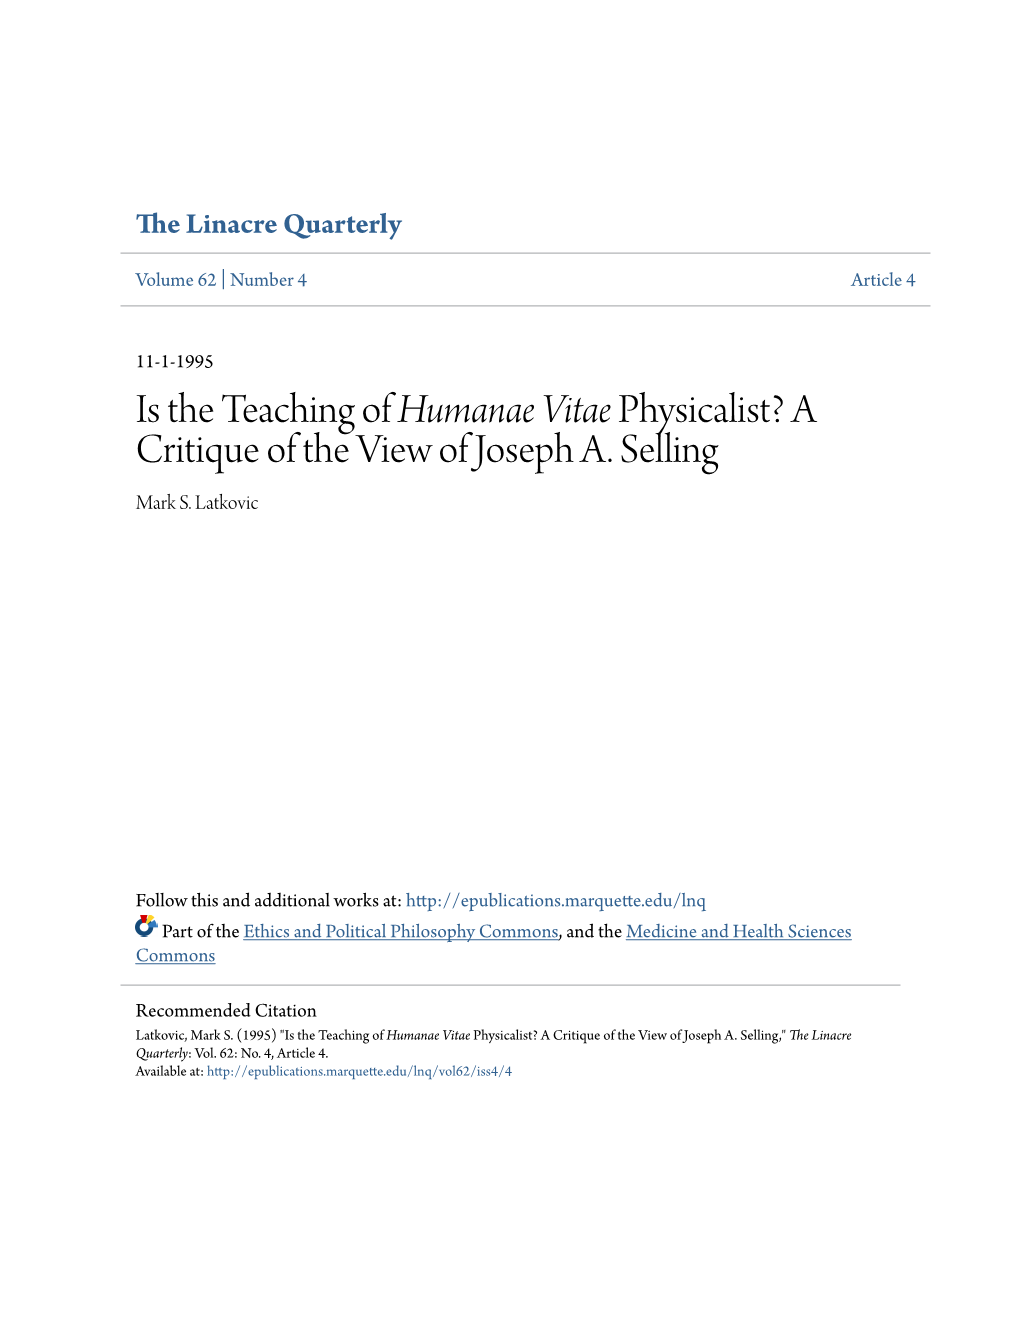 Is the Teaching of Humanae Vitae Physicalist? a Critique of the View of Joseph A. Selling Mark S